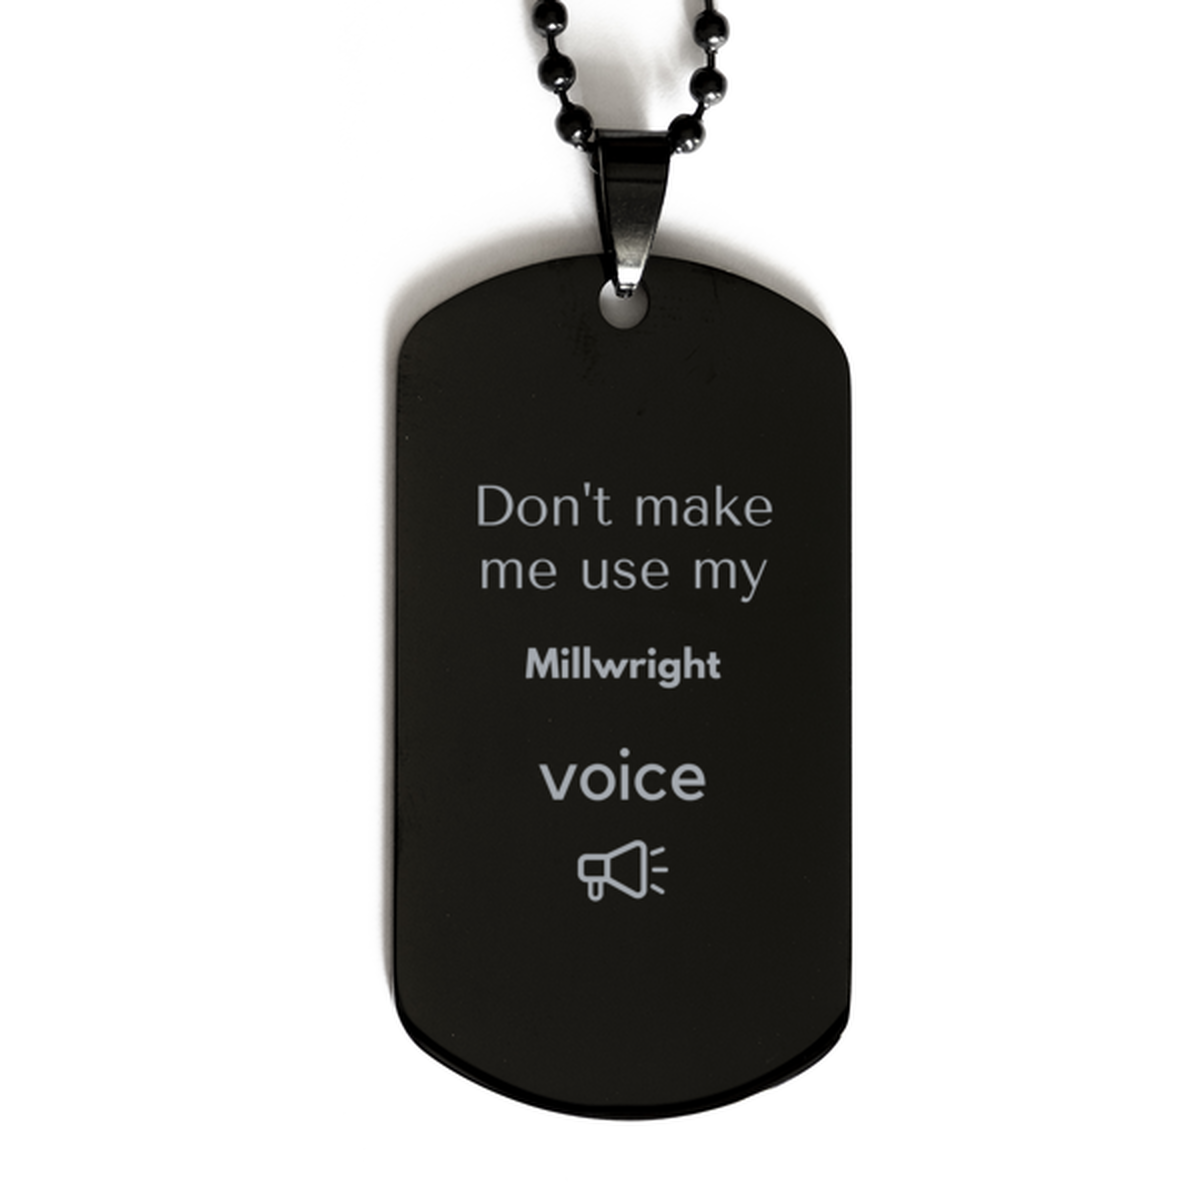 Don't make me use my Millwright voice, Sarcasm Millwright Gifts, Christmas Millwright Black Dog Tag Birthday Unique Gifts For Millwright Coworkers, Men, Women, Colleague, Friends